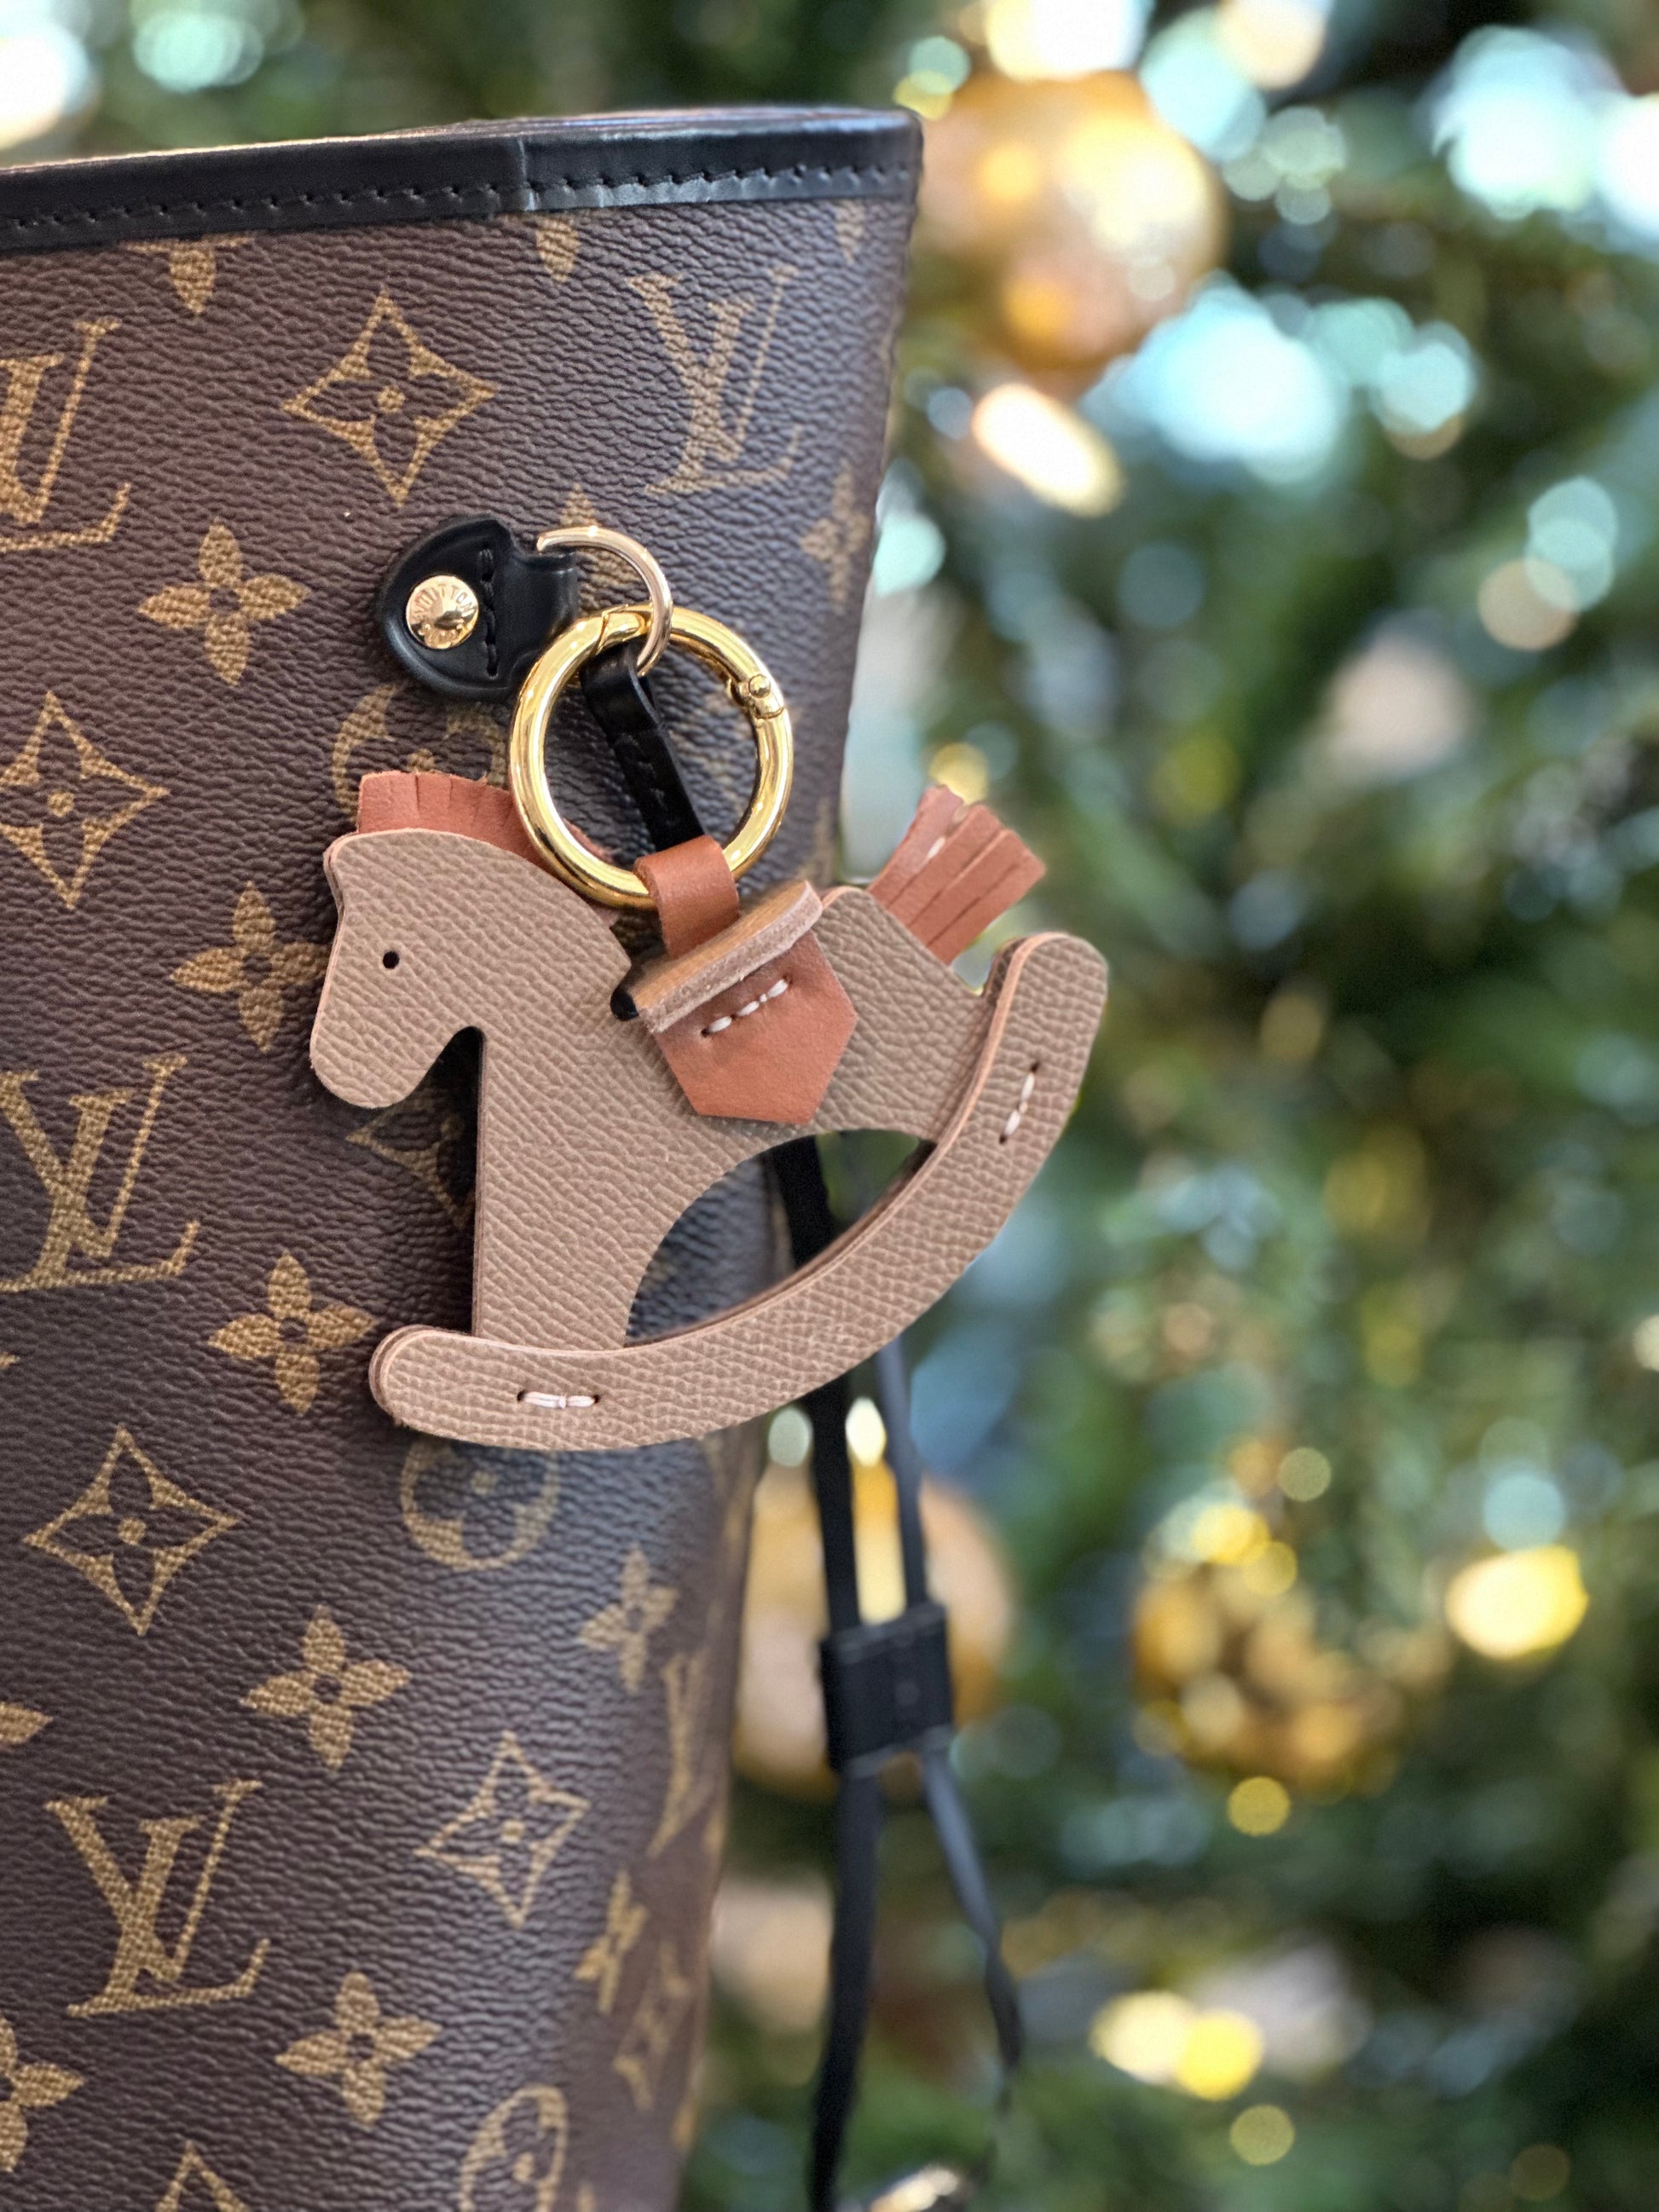 LOUIS VUITTON LUGGAGE TAG & BAG CHARM IDEAS, How To Style